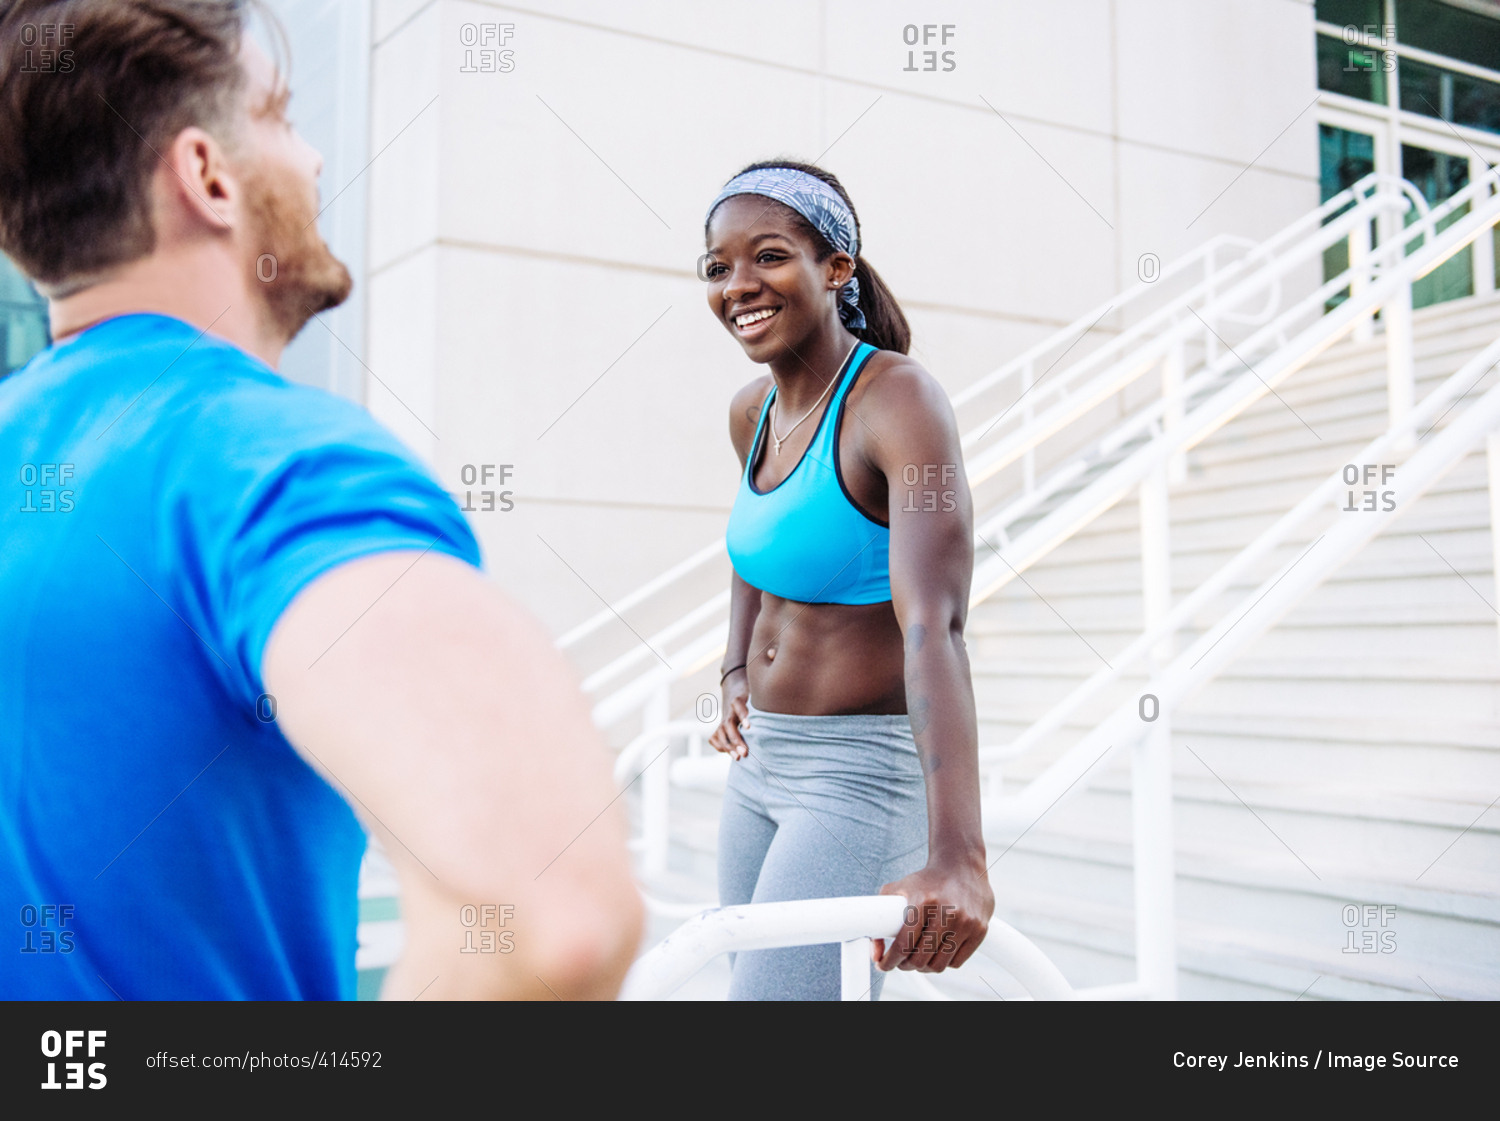 High angle view of man and woman training, taking a break on stairway at sport facility, downtown San Diego, California, USA